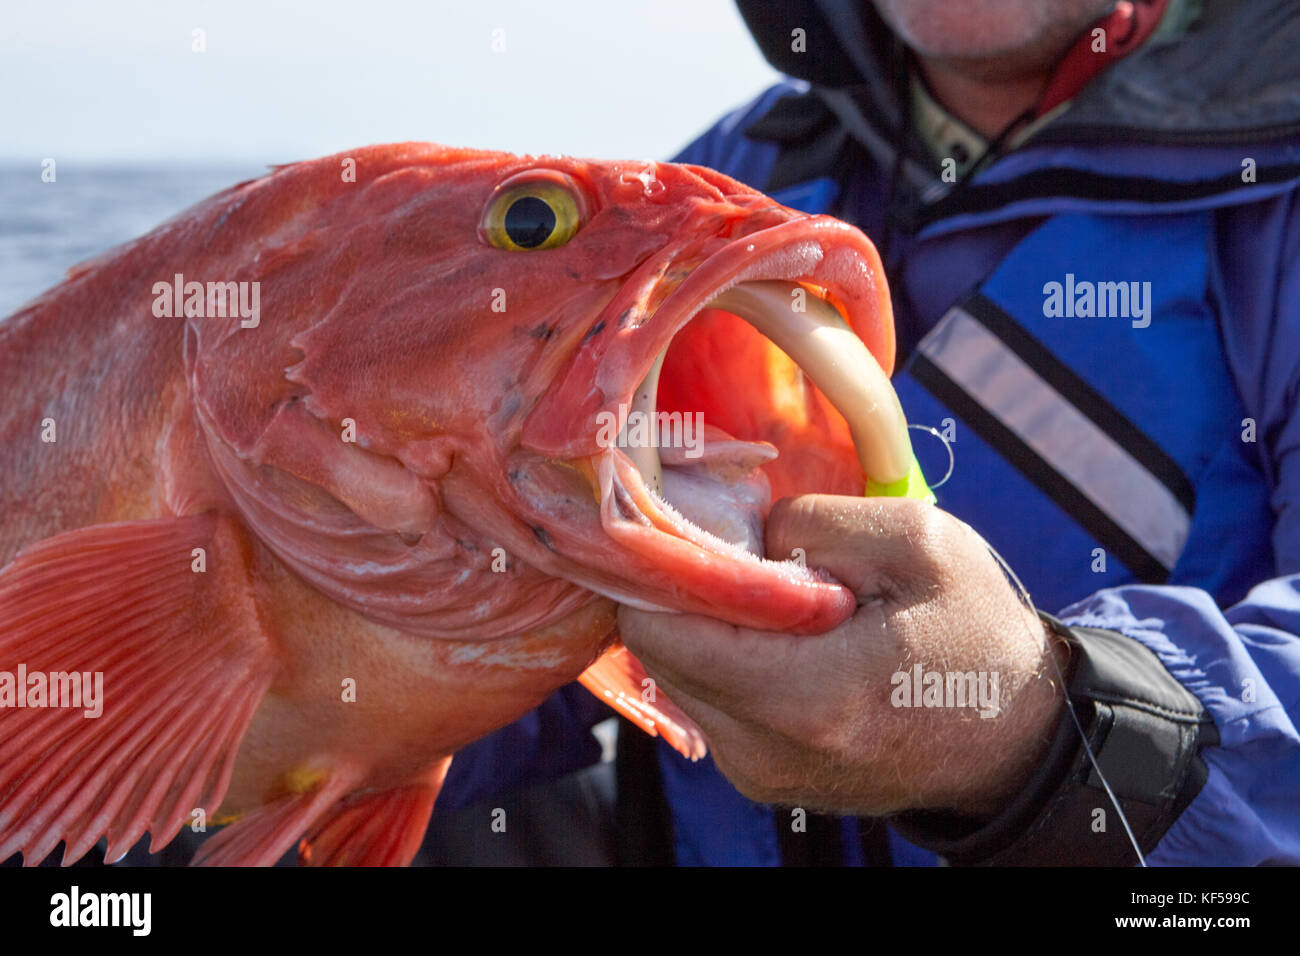 Fisherman holding up a freshly caught rockfish with its mouth open over a lure and line in a close up view of the head of the fish Stock Photo